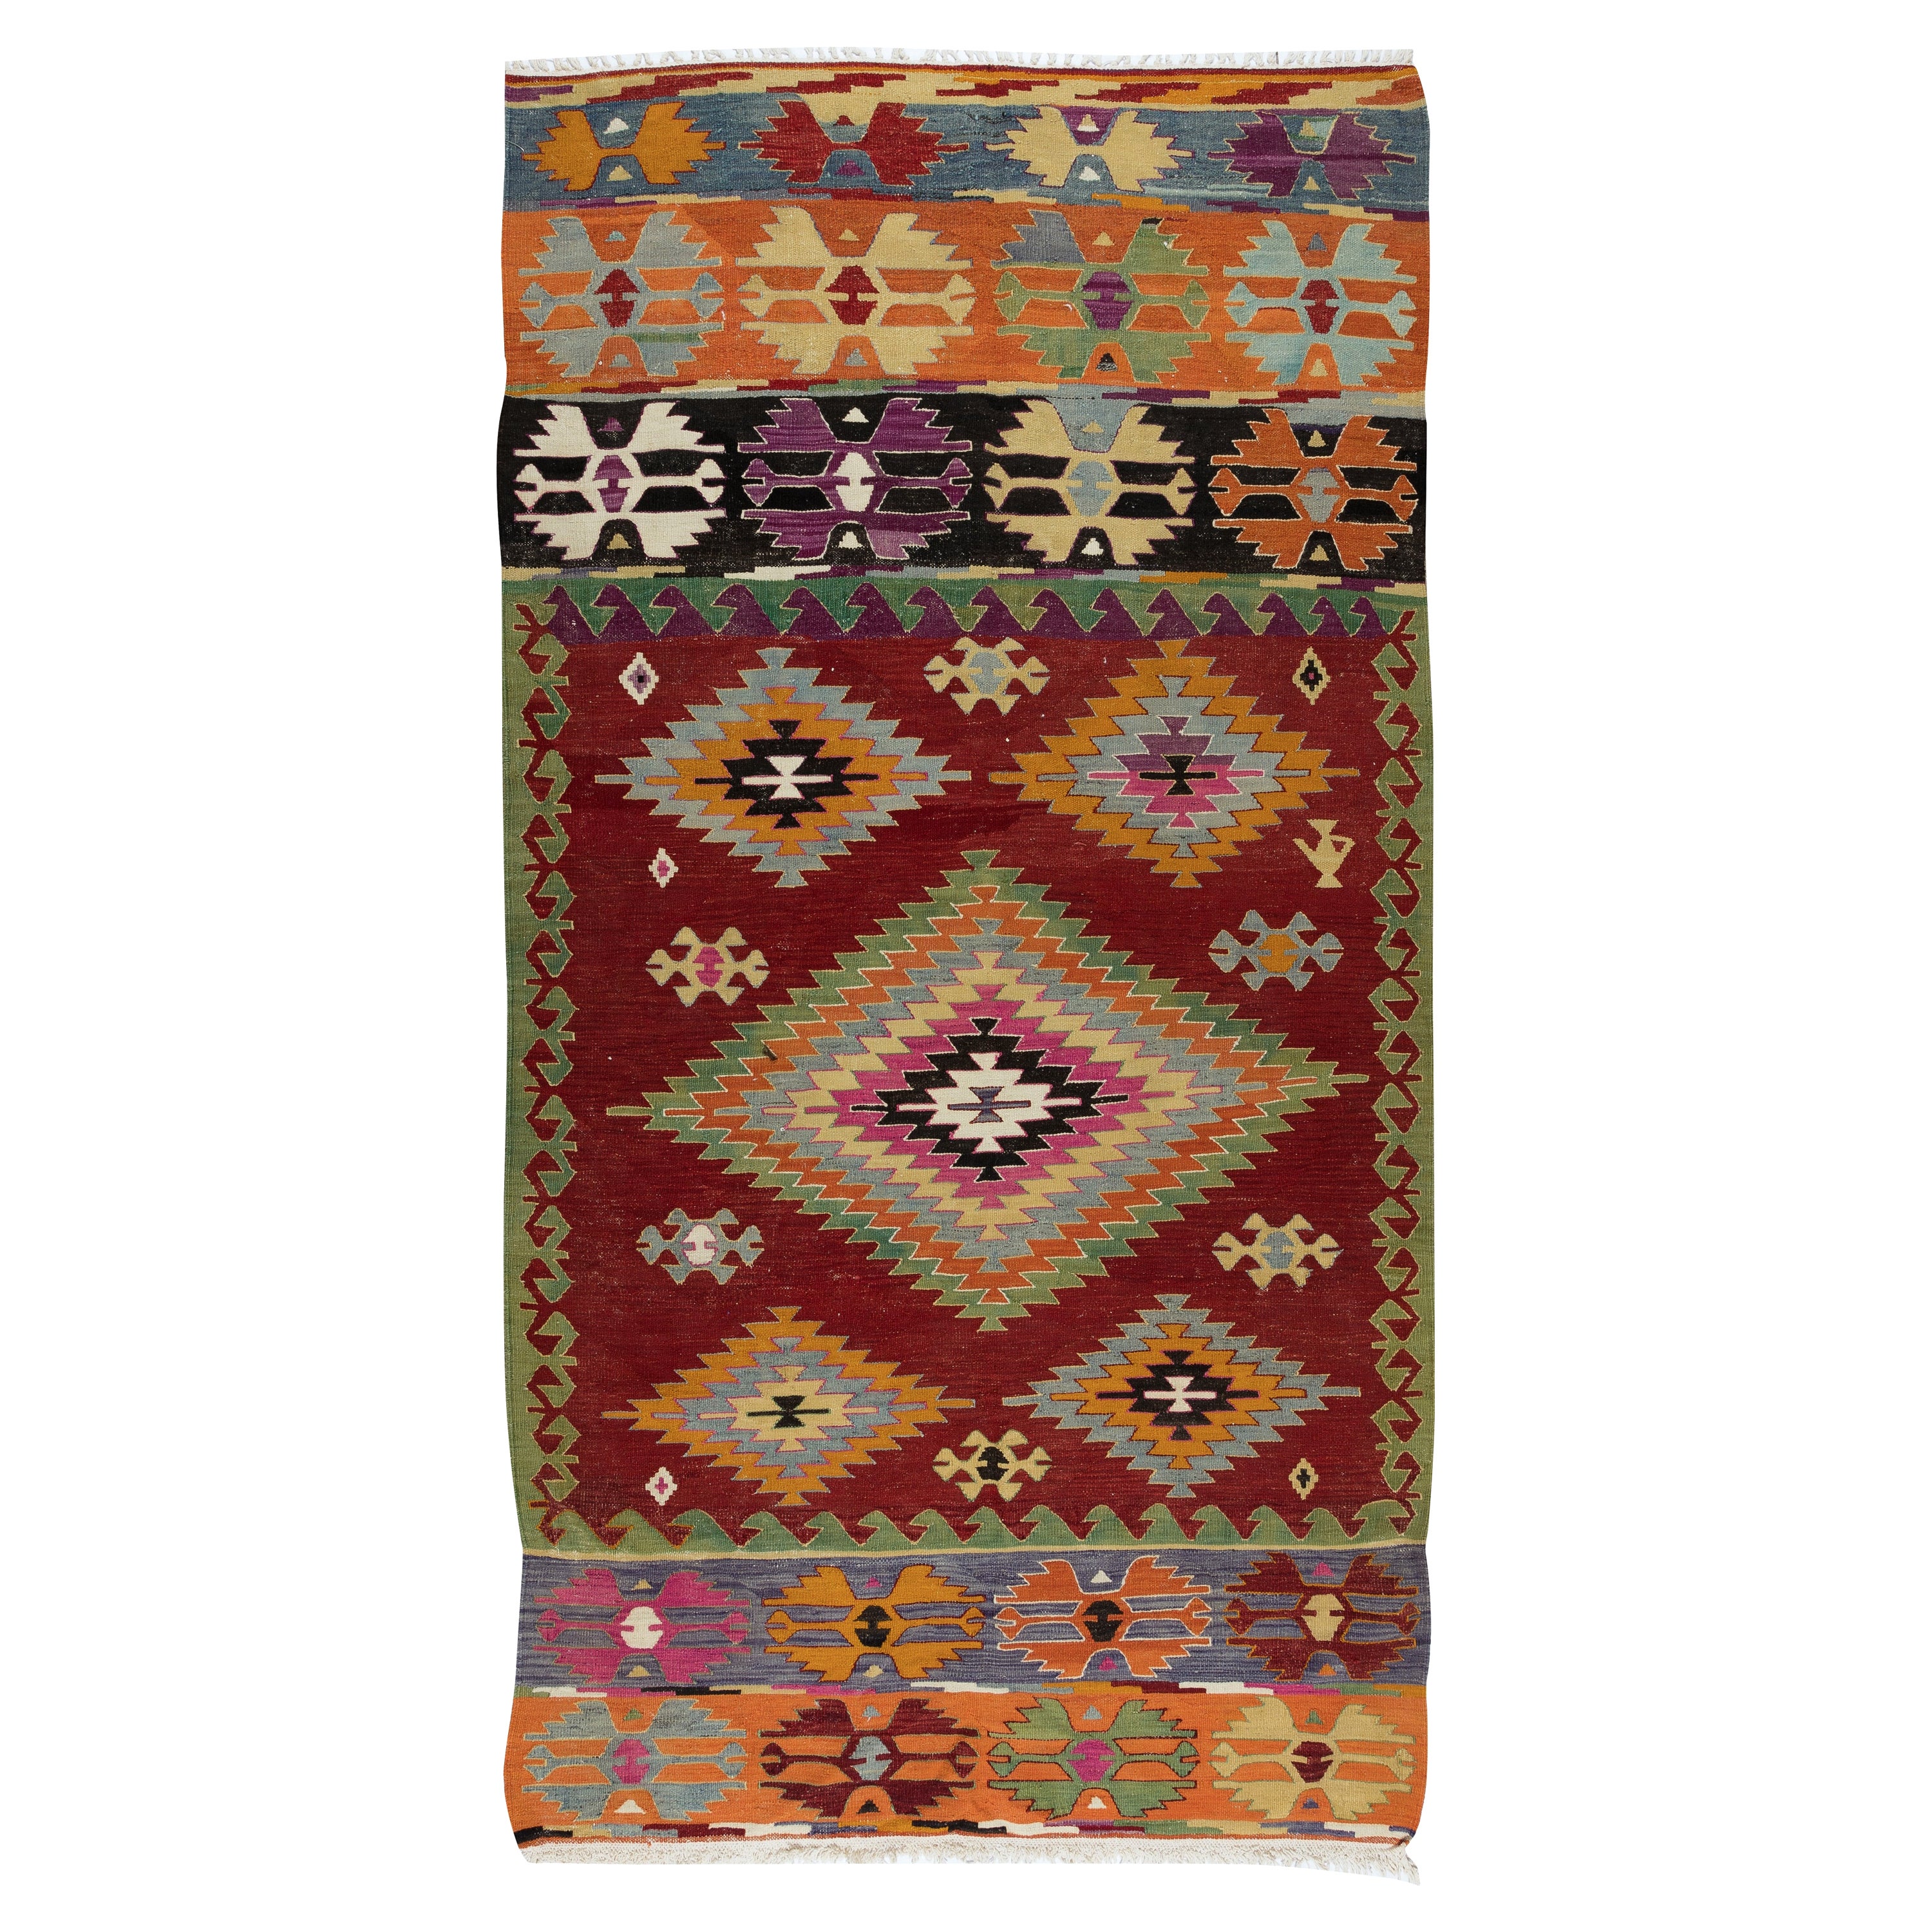 5x9.6 Ft Hand-Woven Geometric Vintage Kilim From Turkey, 100% Wool, Colorful Rug